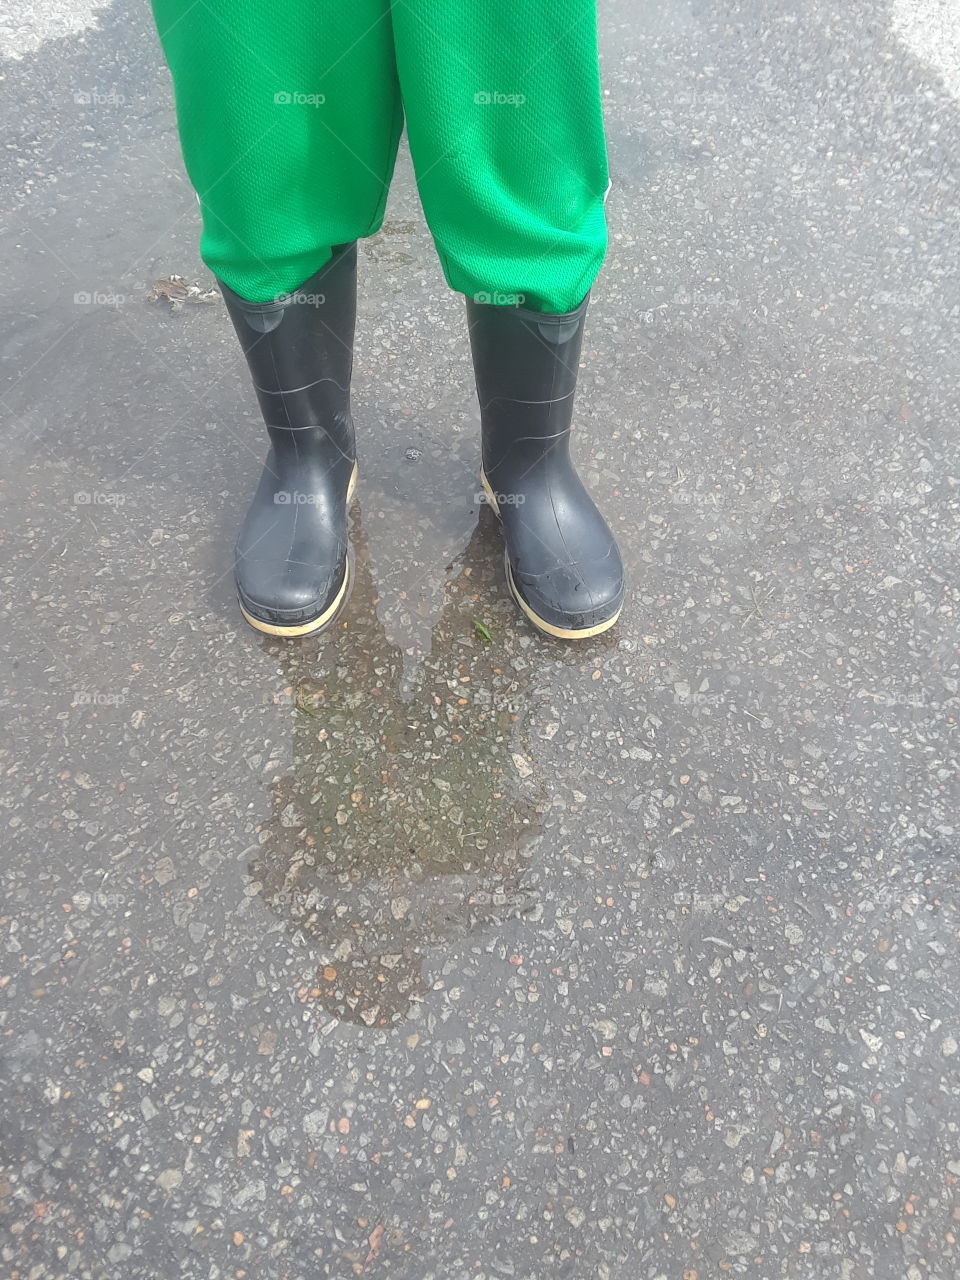 Showing off rain boots